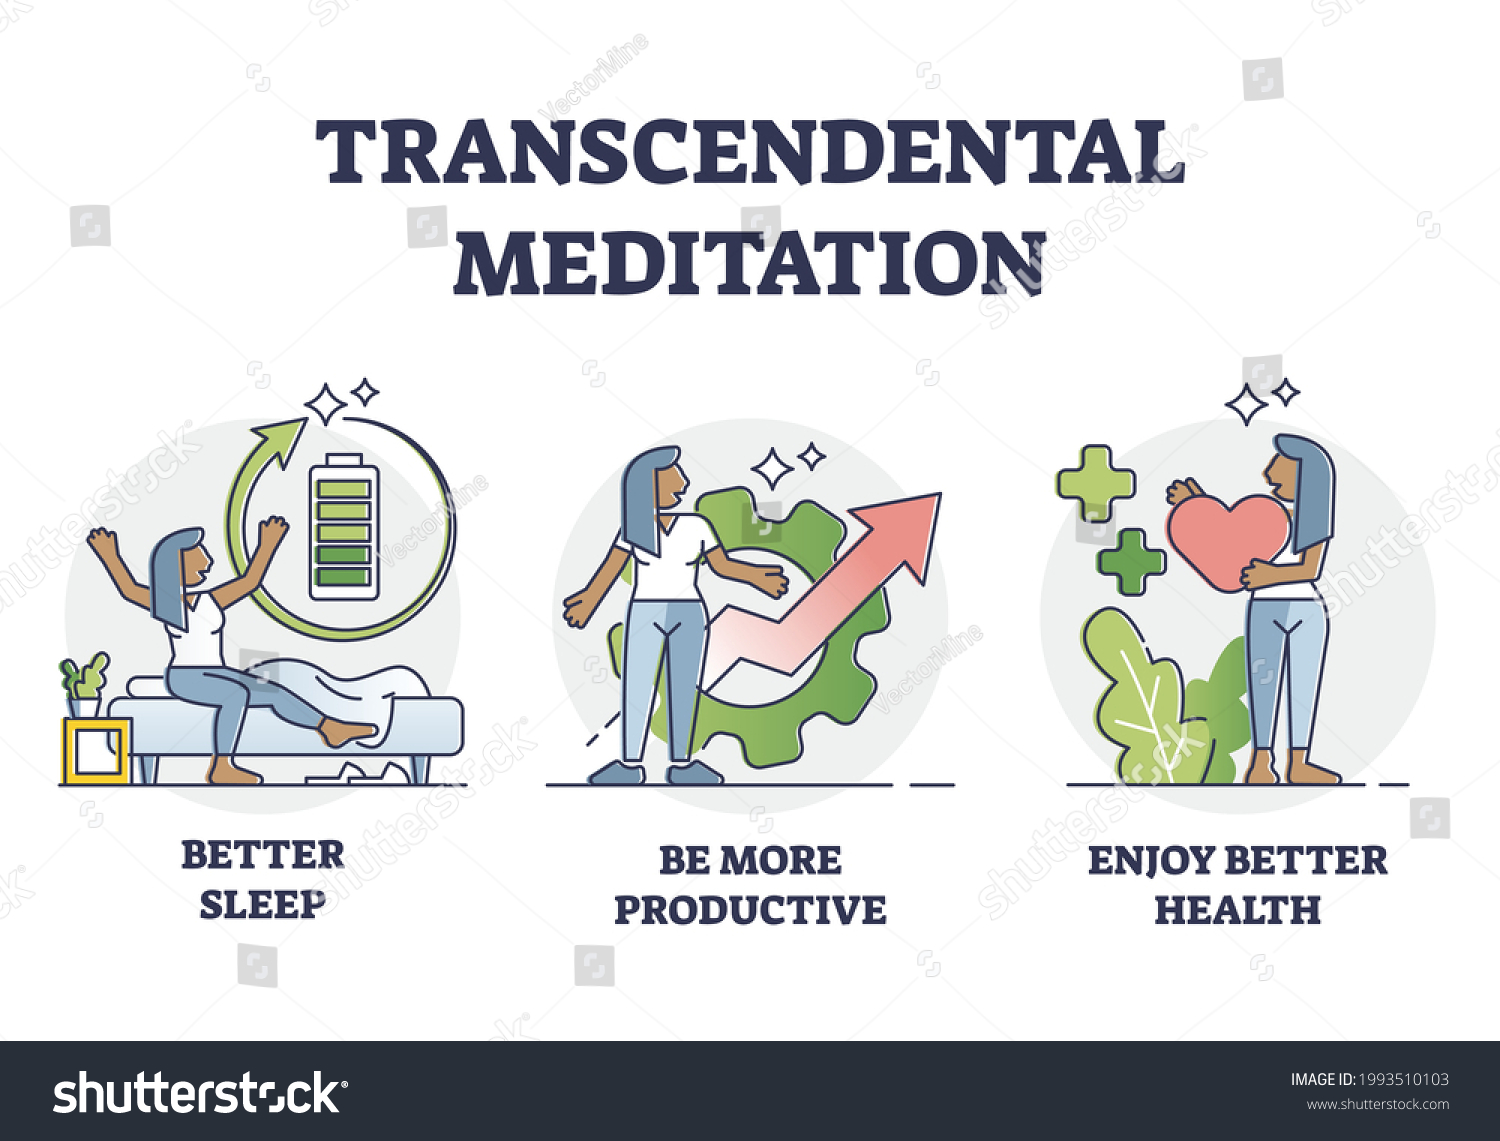 SVG of Transcendental meditation benefits and positive aspects outline diagram. Relaxation, spiritual wellness and mental balance practicing in everyday life with better sleep, productiveness or better heath svg